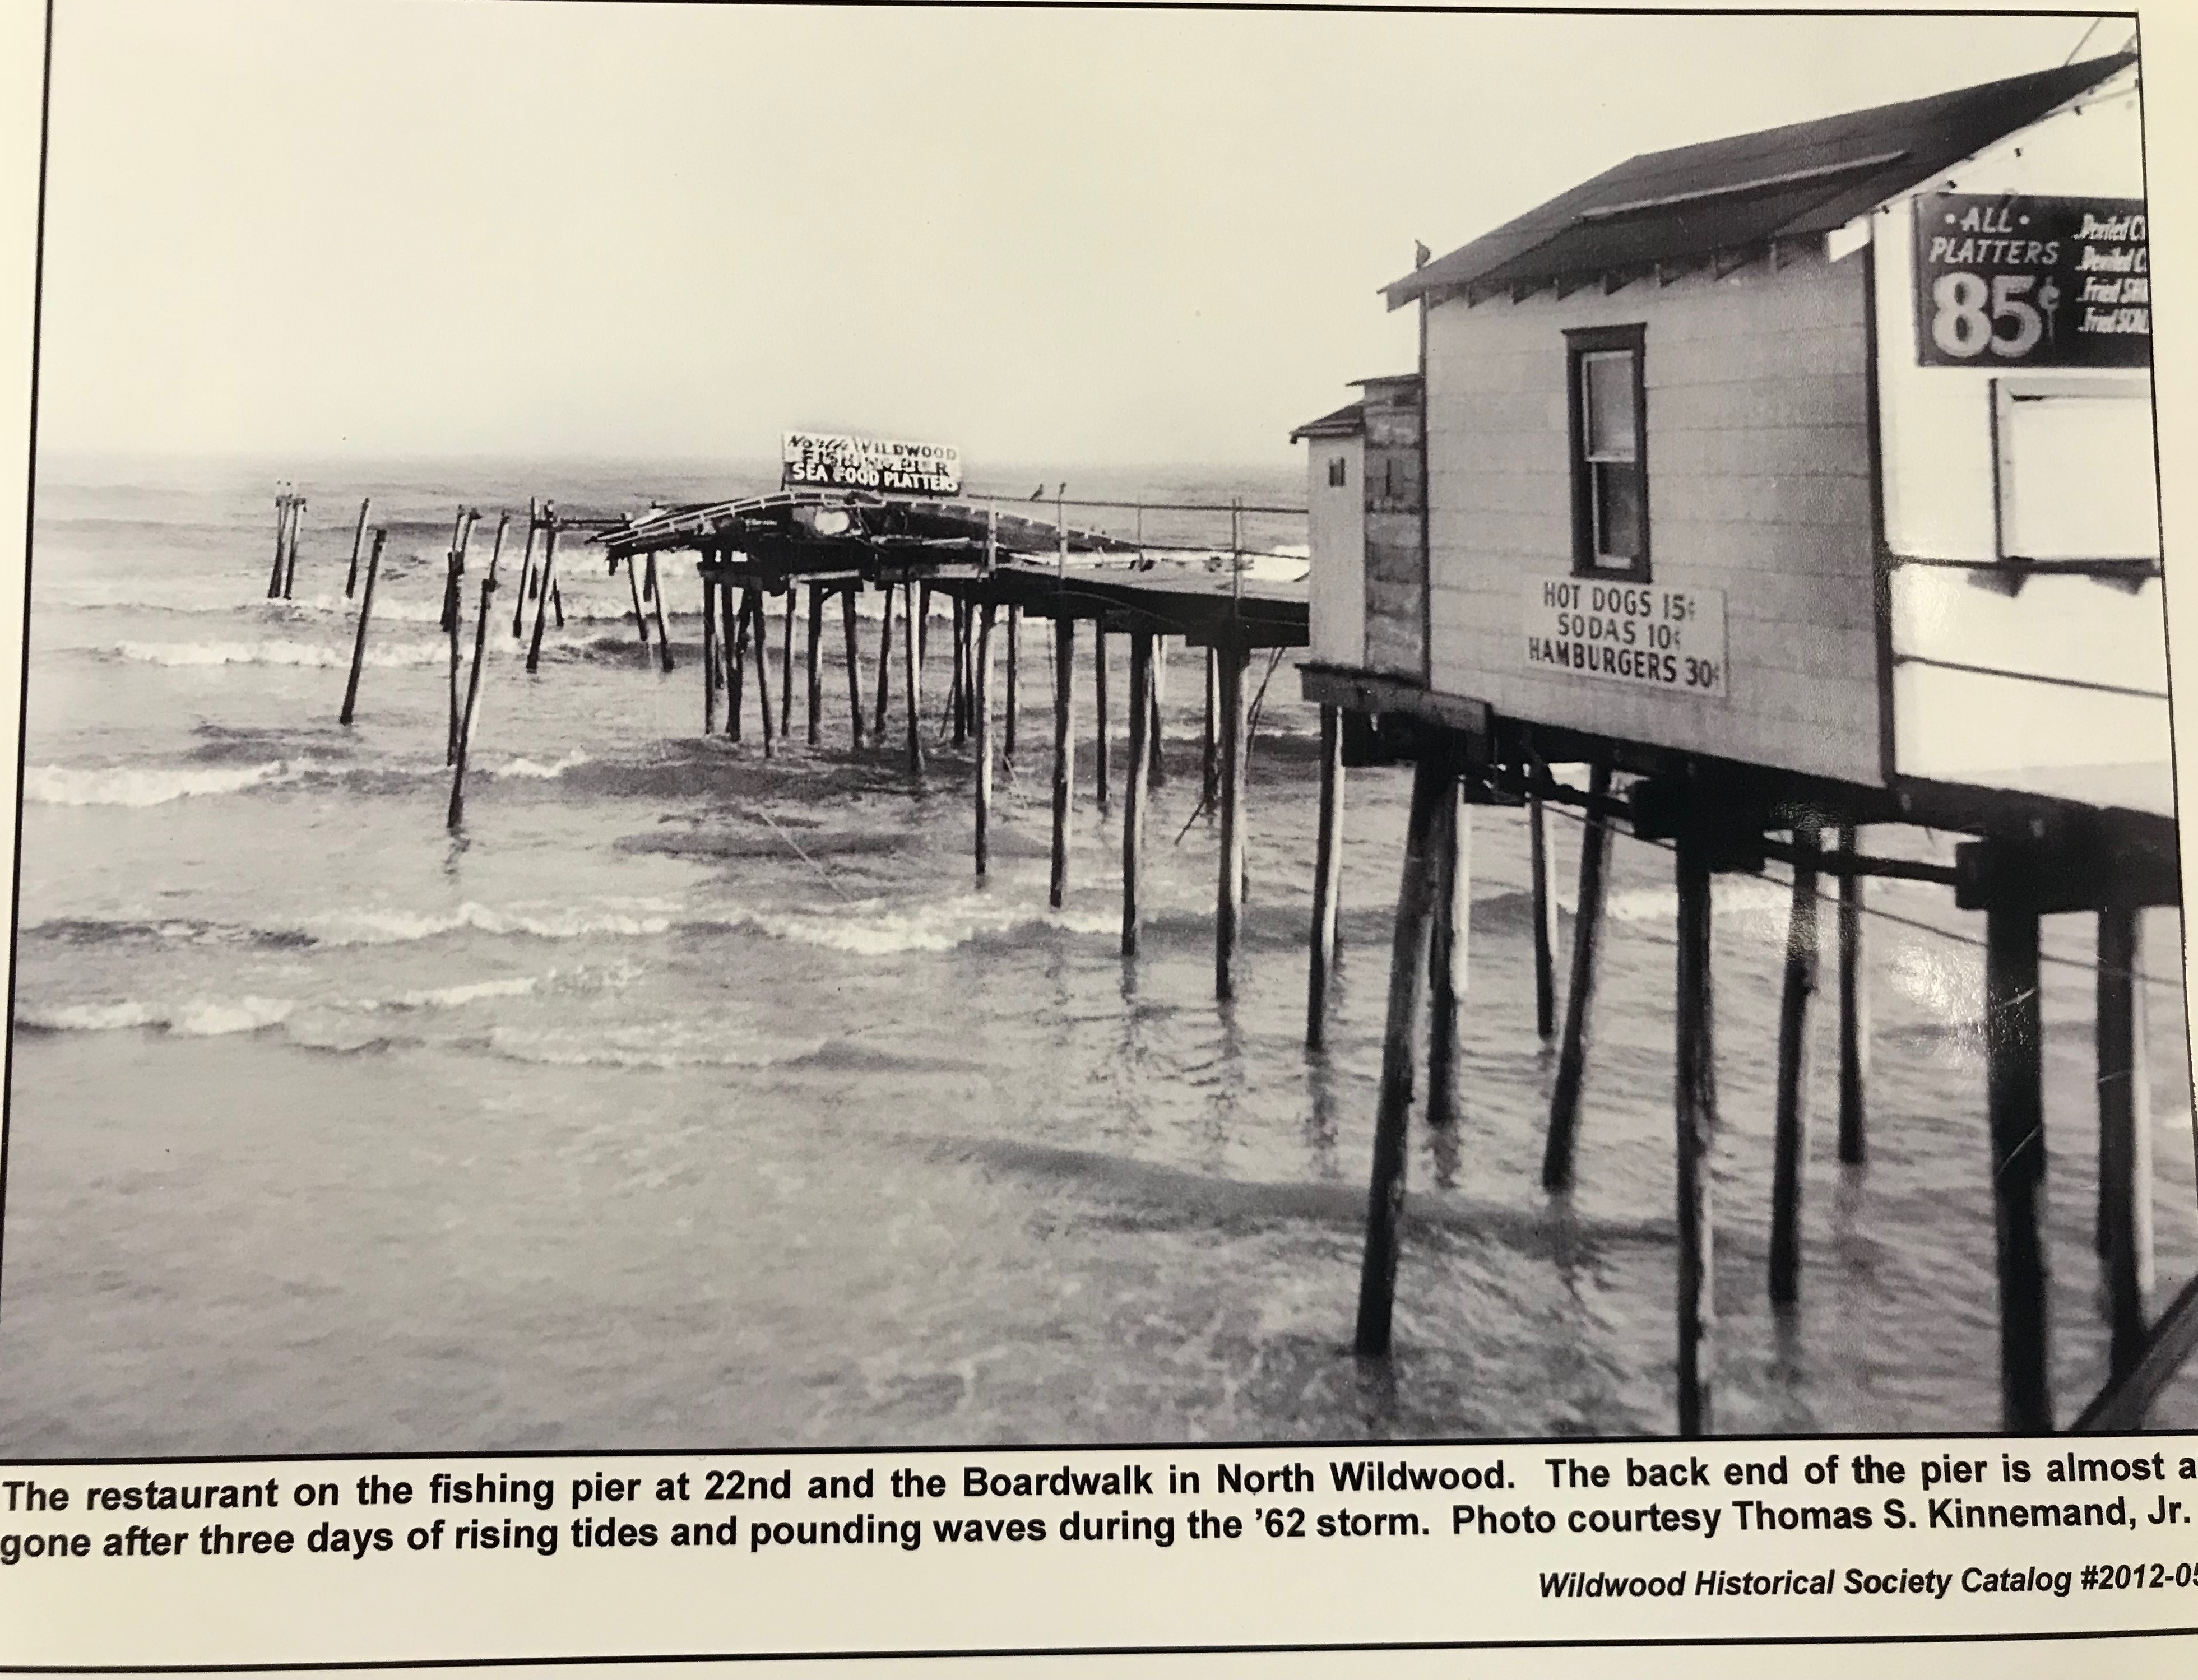 The History and Future of Seaport Pier in North Wildwood, New